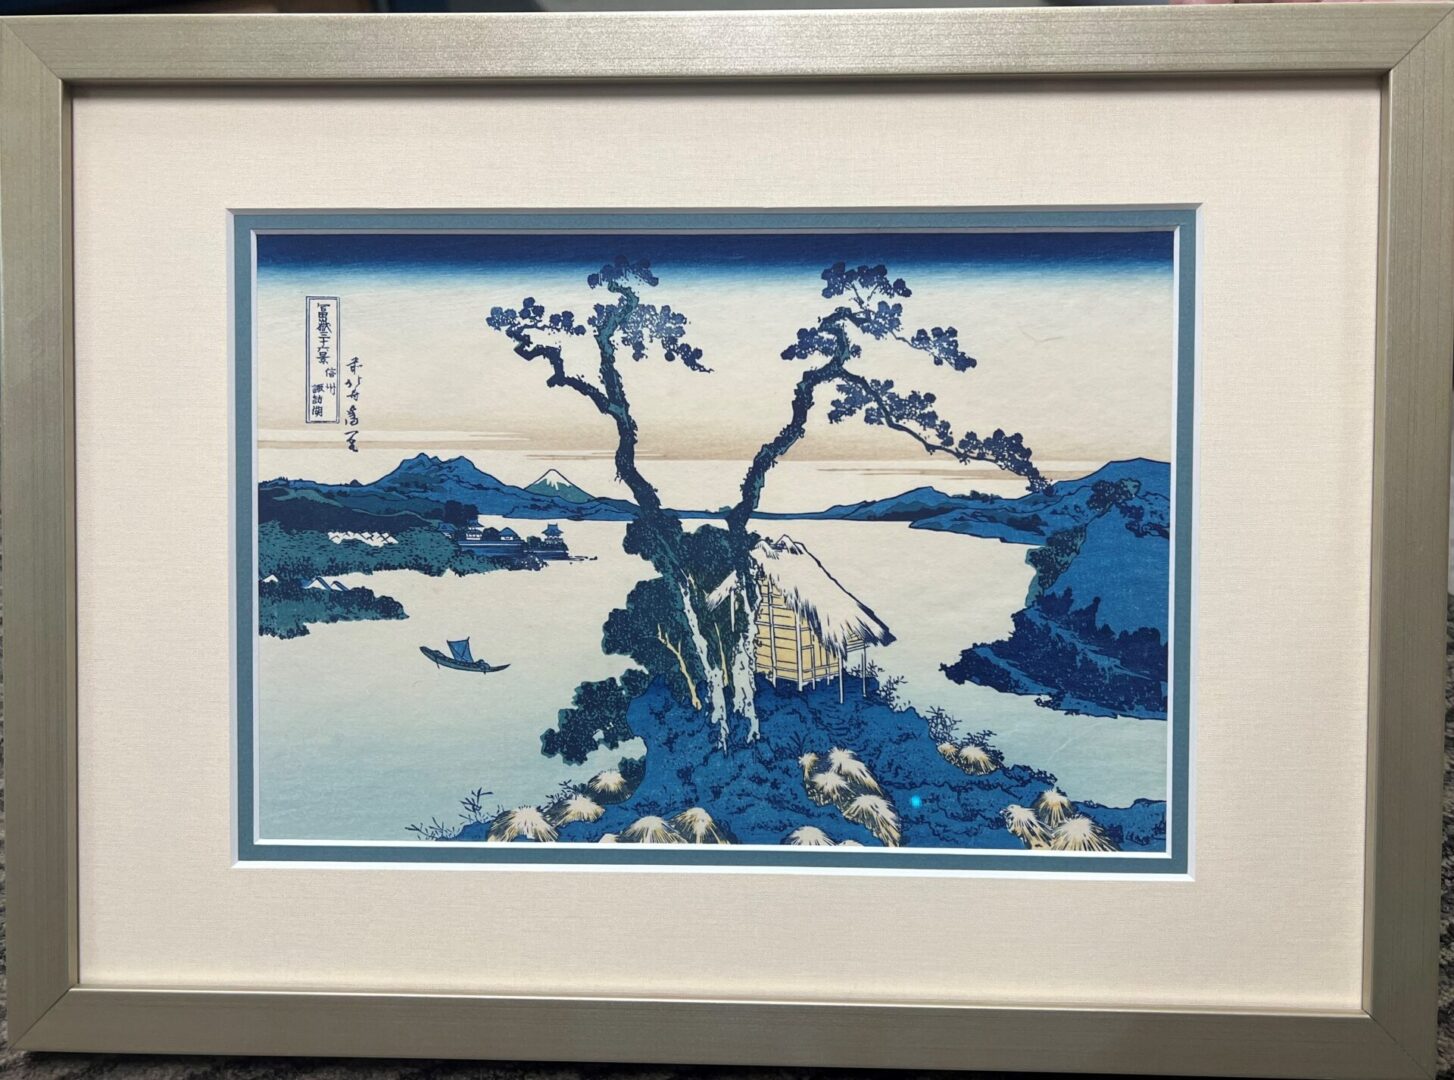 A painting of a tree in the water